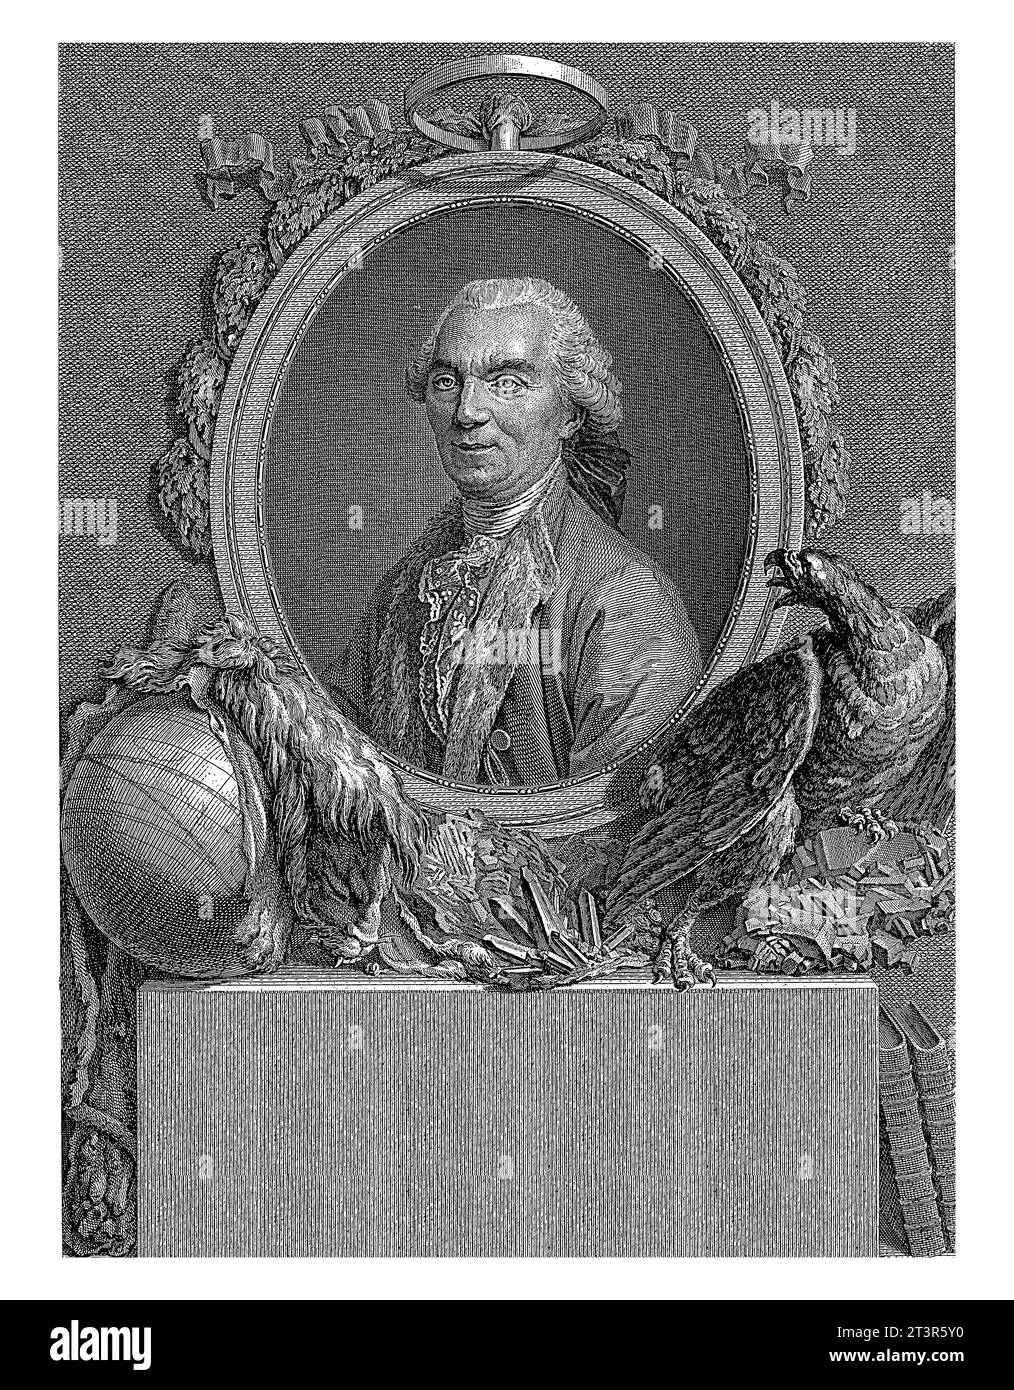 Portrait of Georges-Louis Leclerc, Count of Buffon, Vincenzo Vangelisti, after Andre Pujos, 1777, vintage engraved. Stock Photo